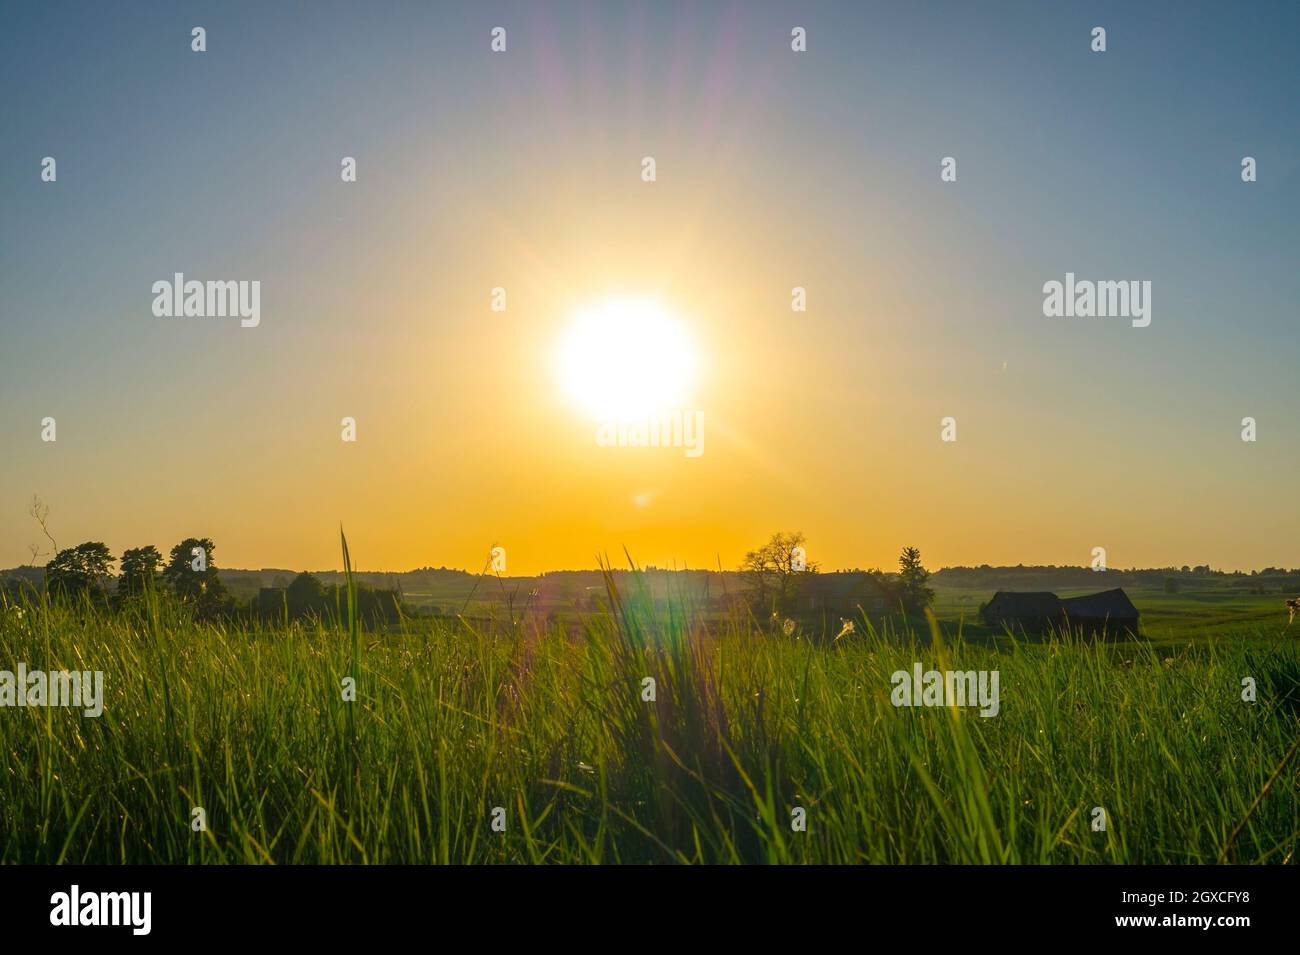 Rural landscape and sunset Stock Photo